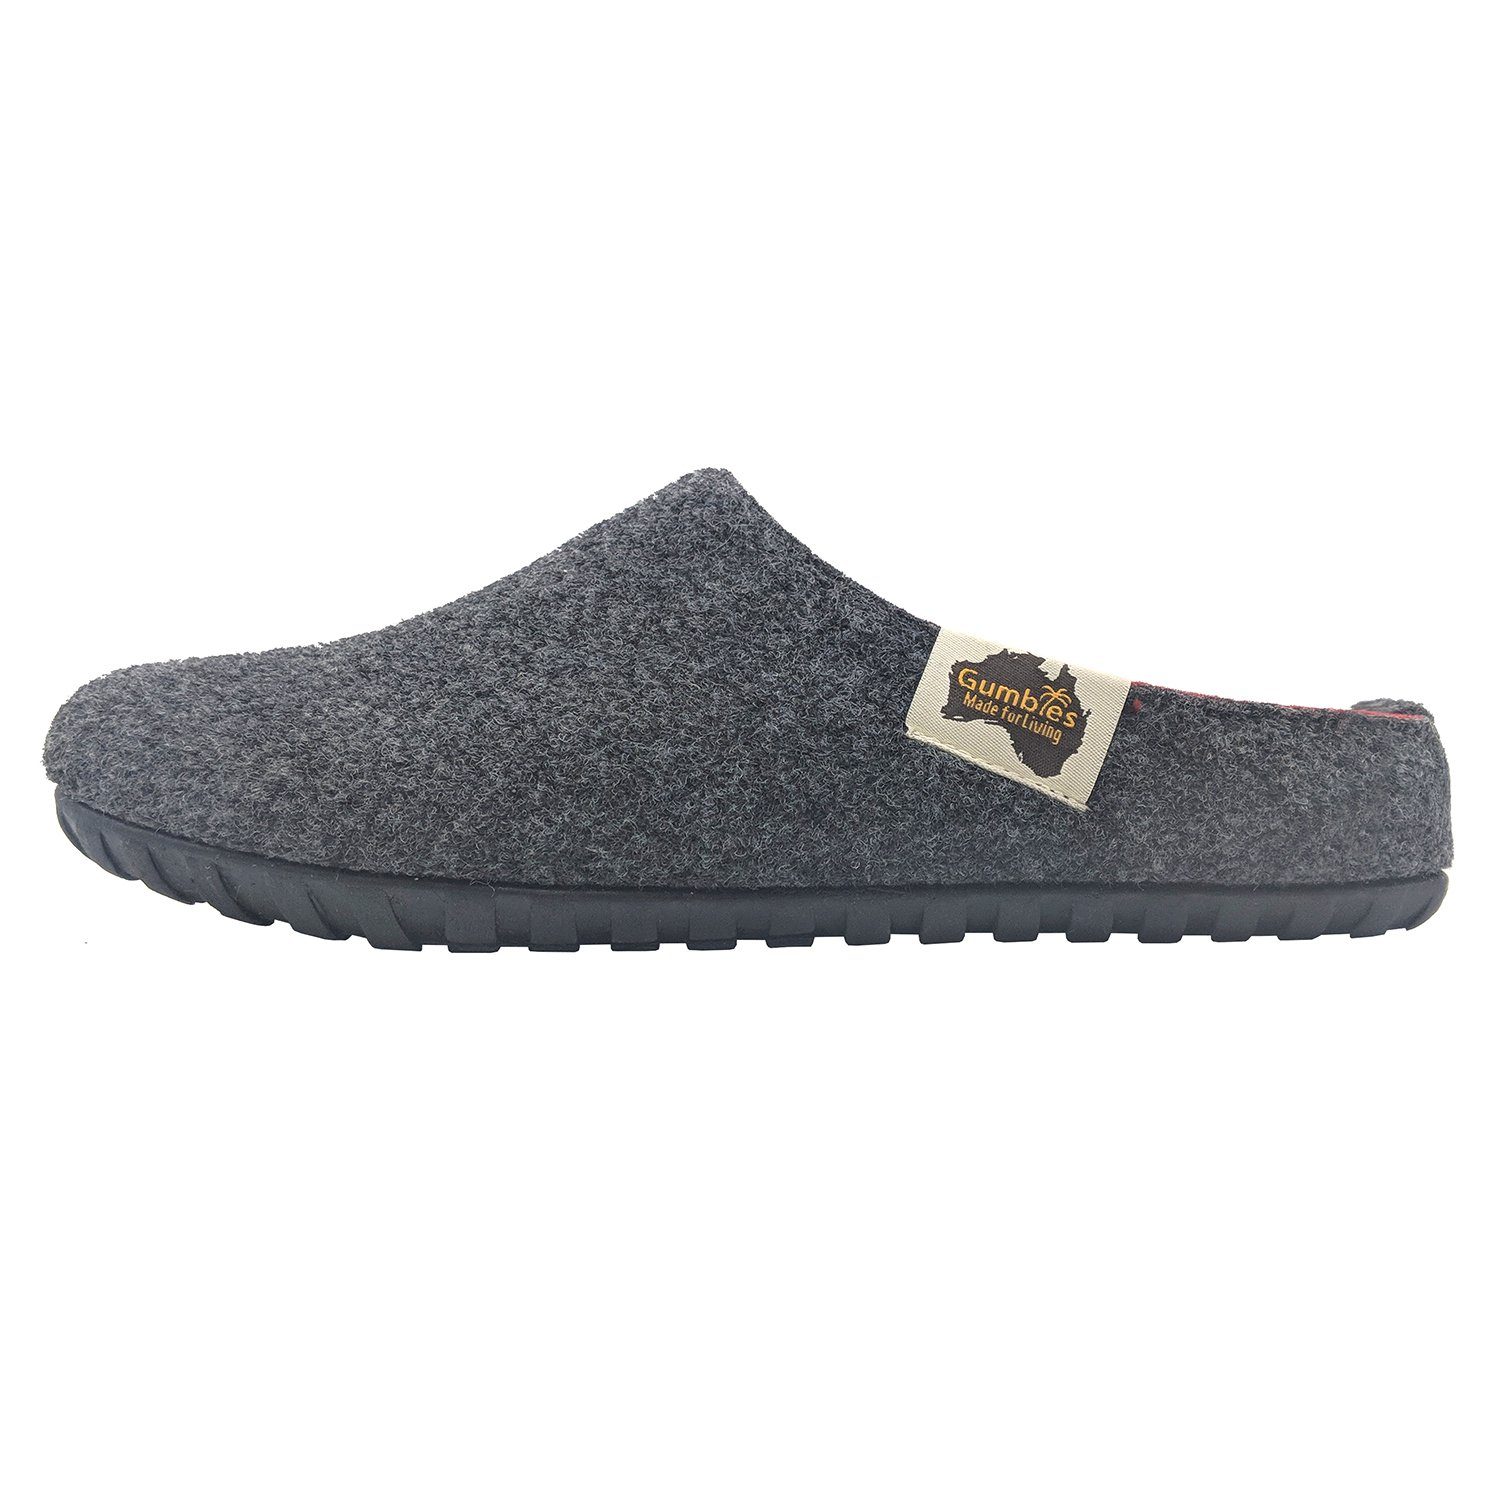 Materialien »in Red farbenfrohen Outback Hausschuh in Slipper recycelten Charcoal charcoal-Red Gumbies Designs« aus